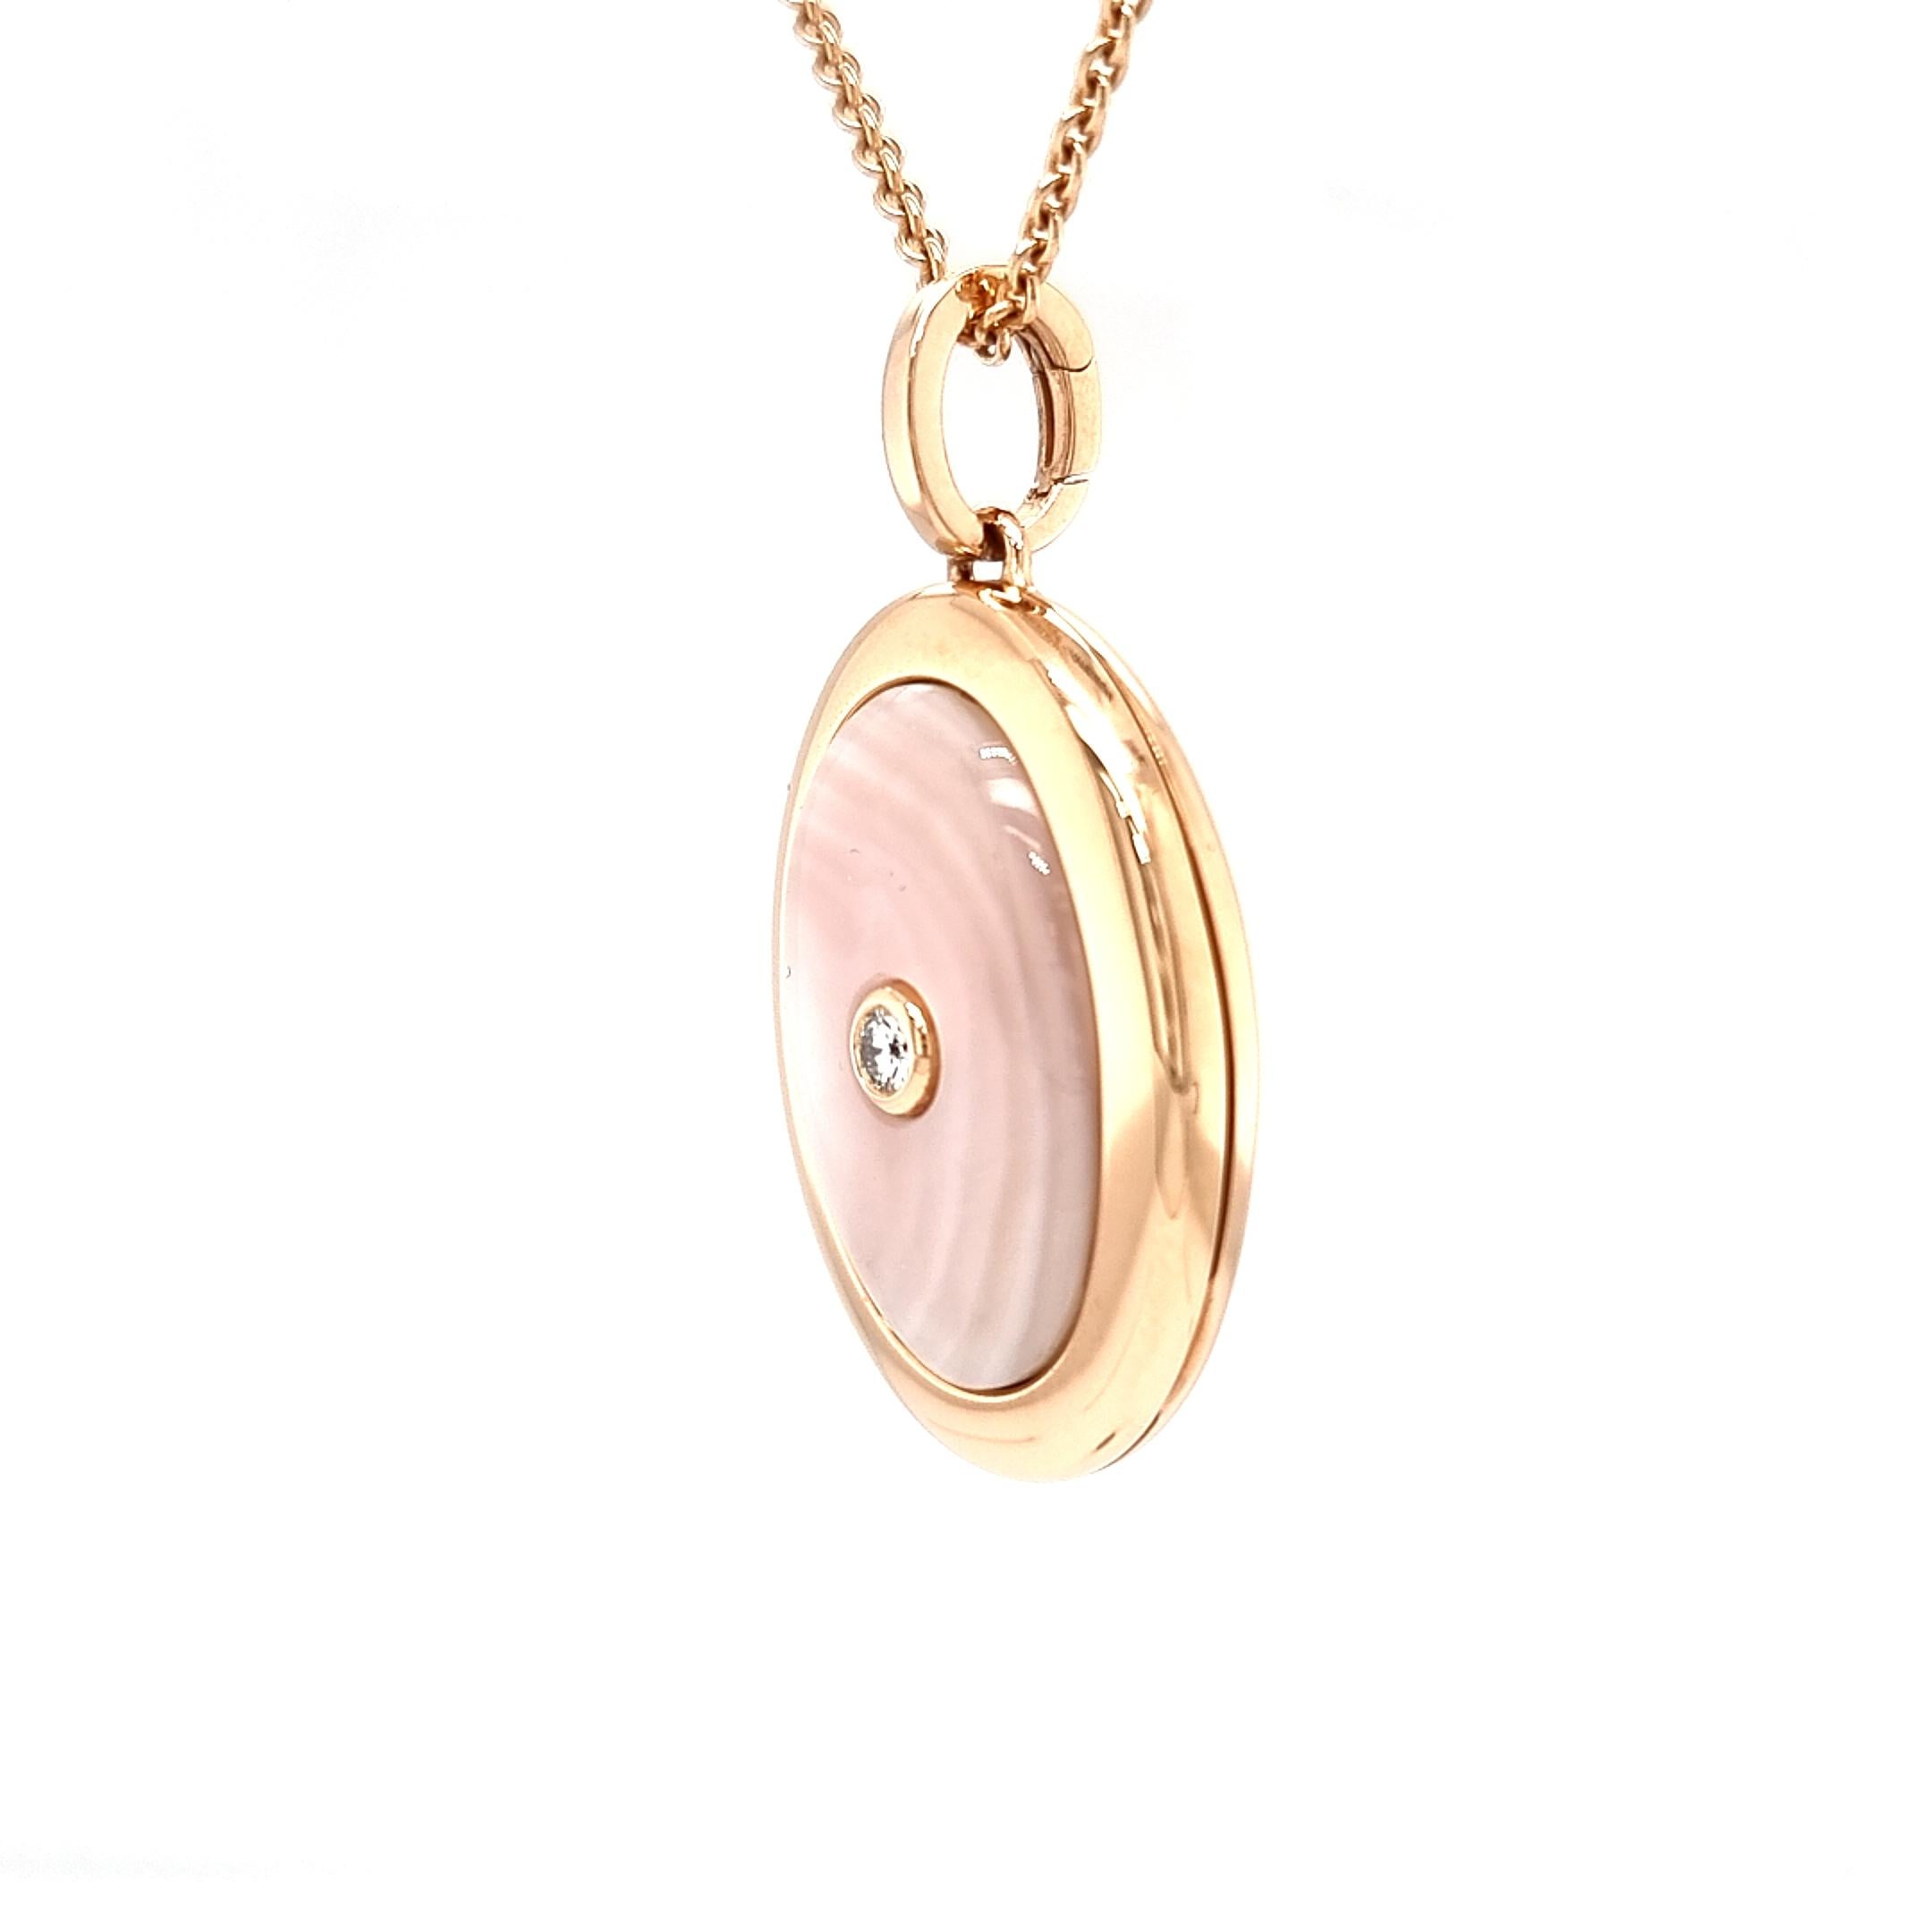 Women's Oval Locket Pendant Necklace - 18k Rose Gold - 1 Diamond 0.10 ct H VS Pink Pearl For Sale